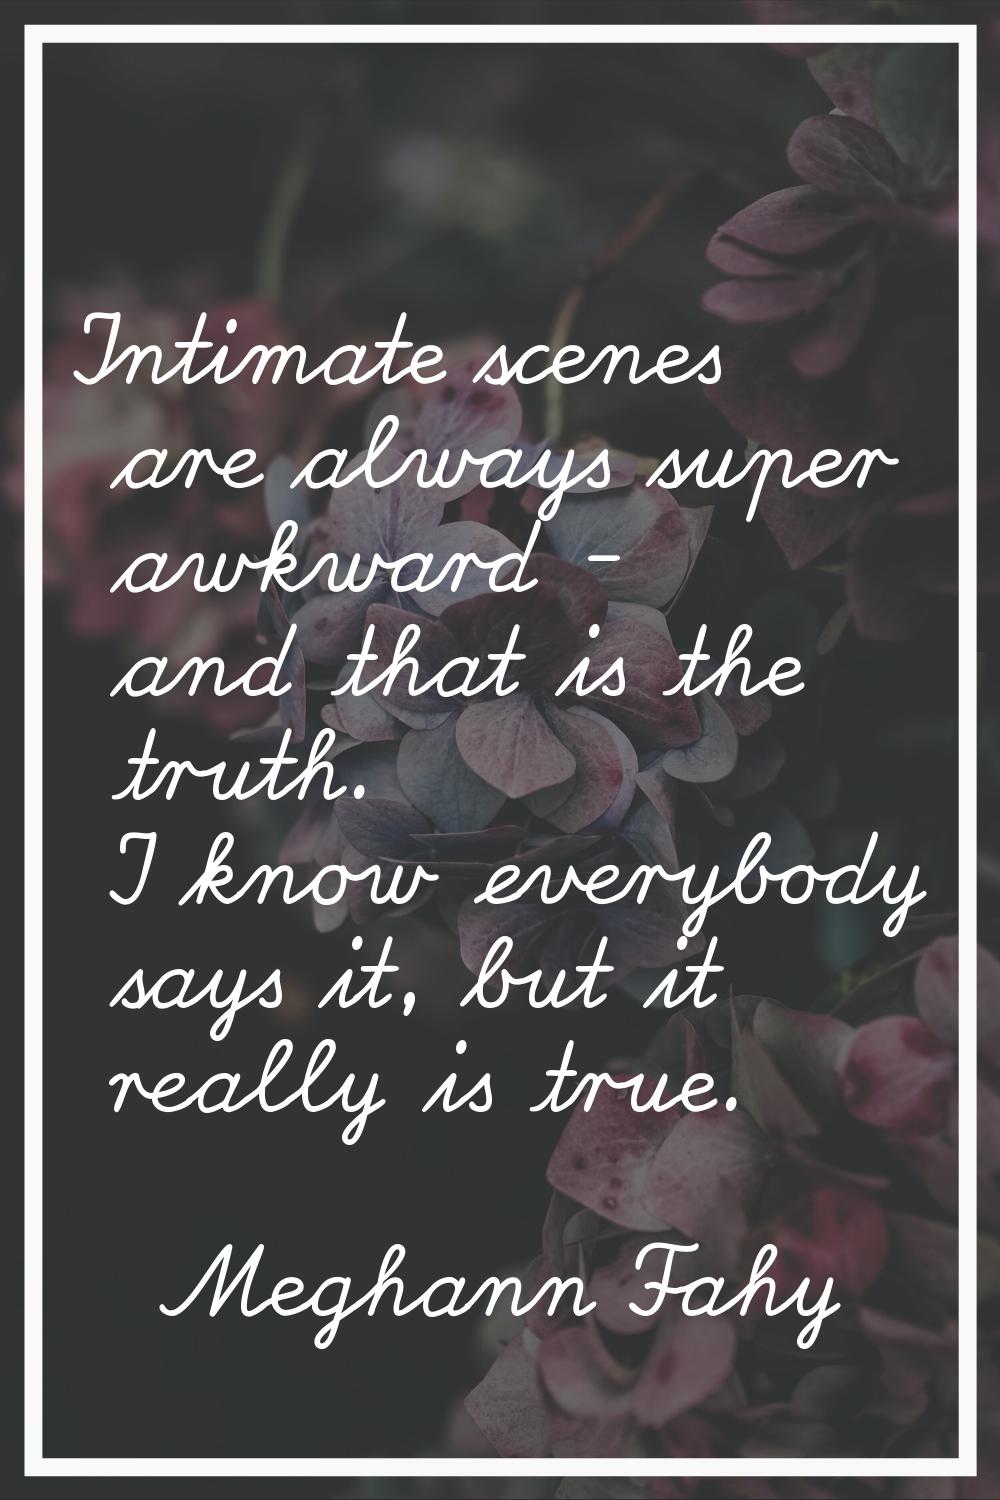 Intimate scenes are always super awkward - and that is the truth. I know everybody says it, but it 